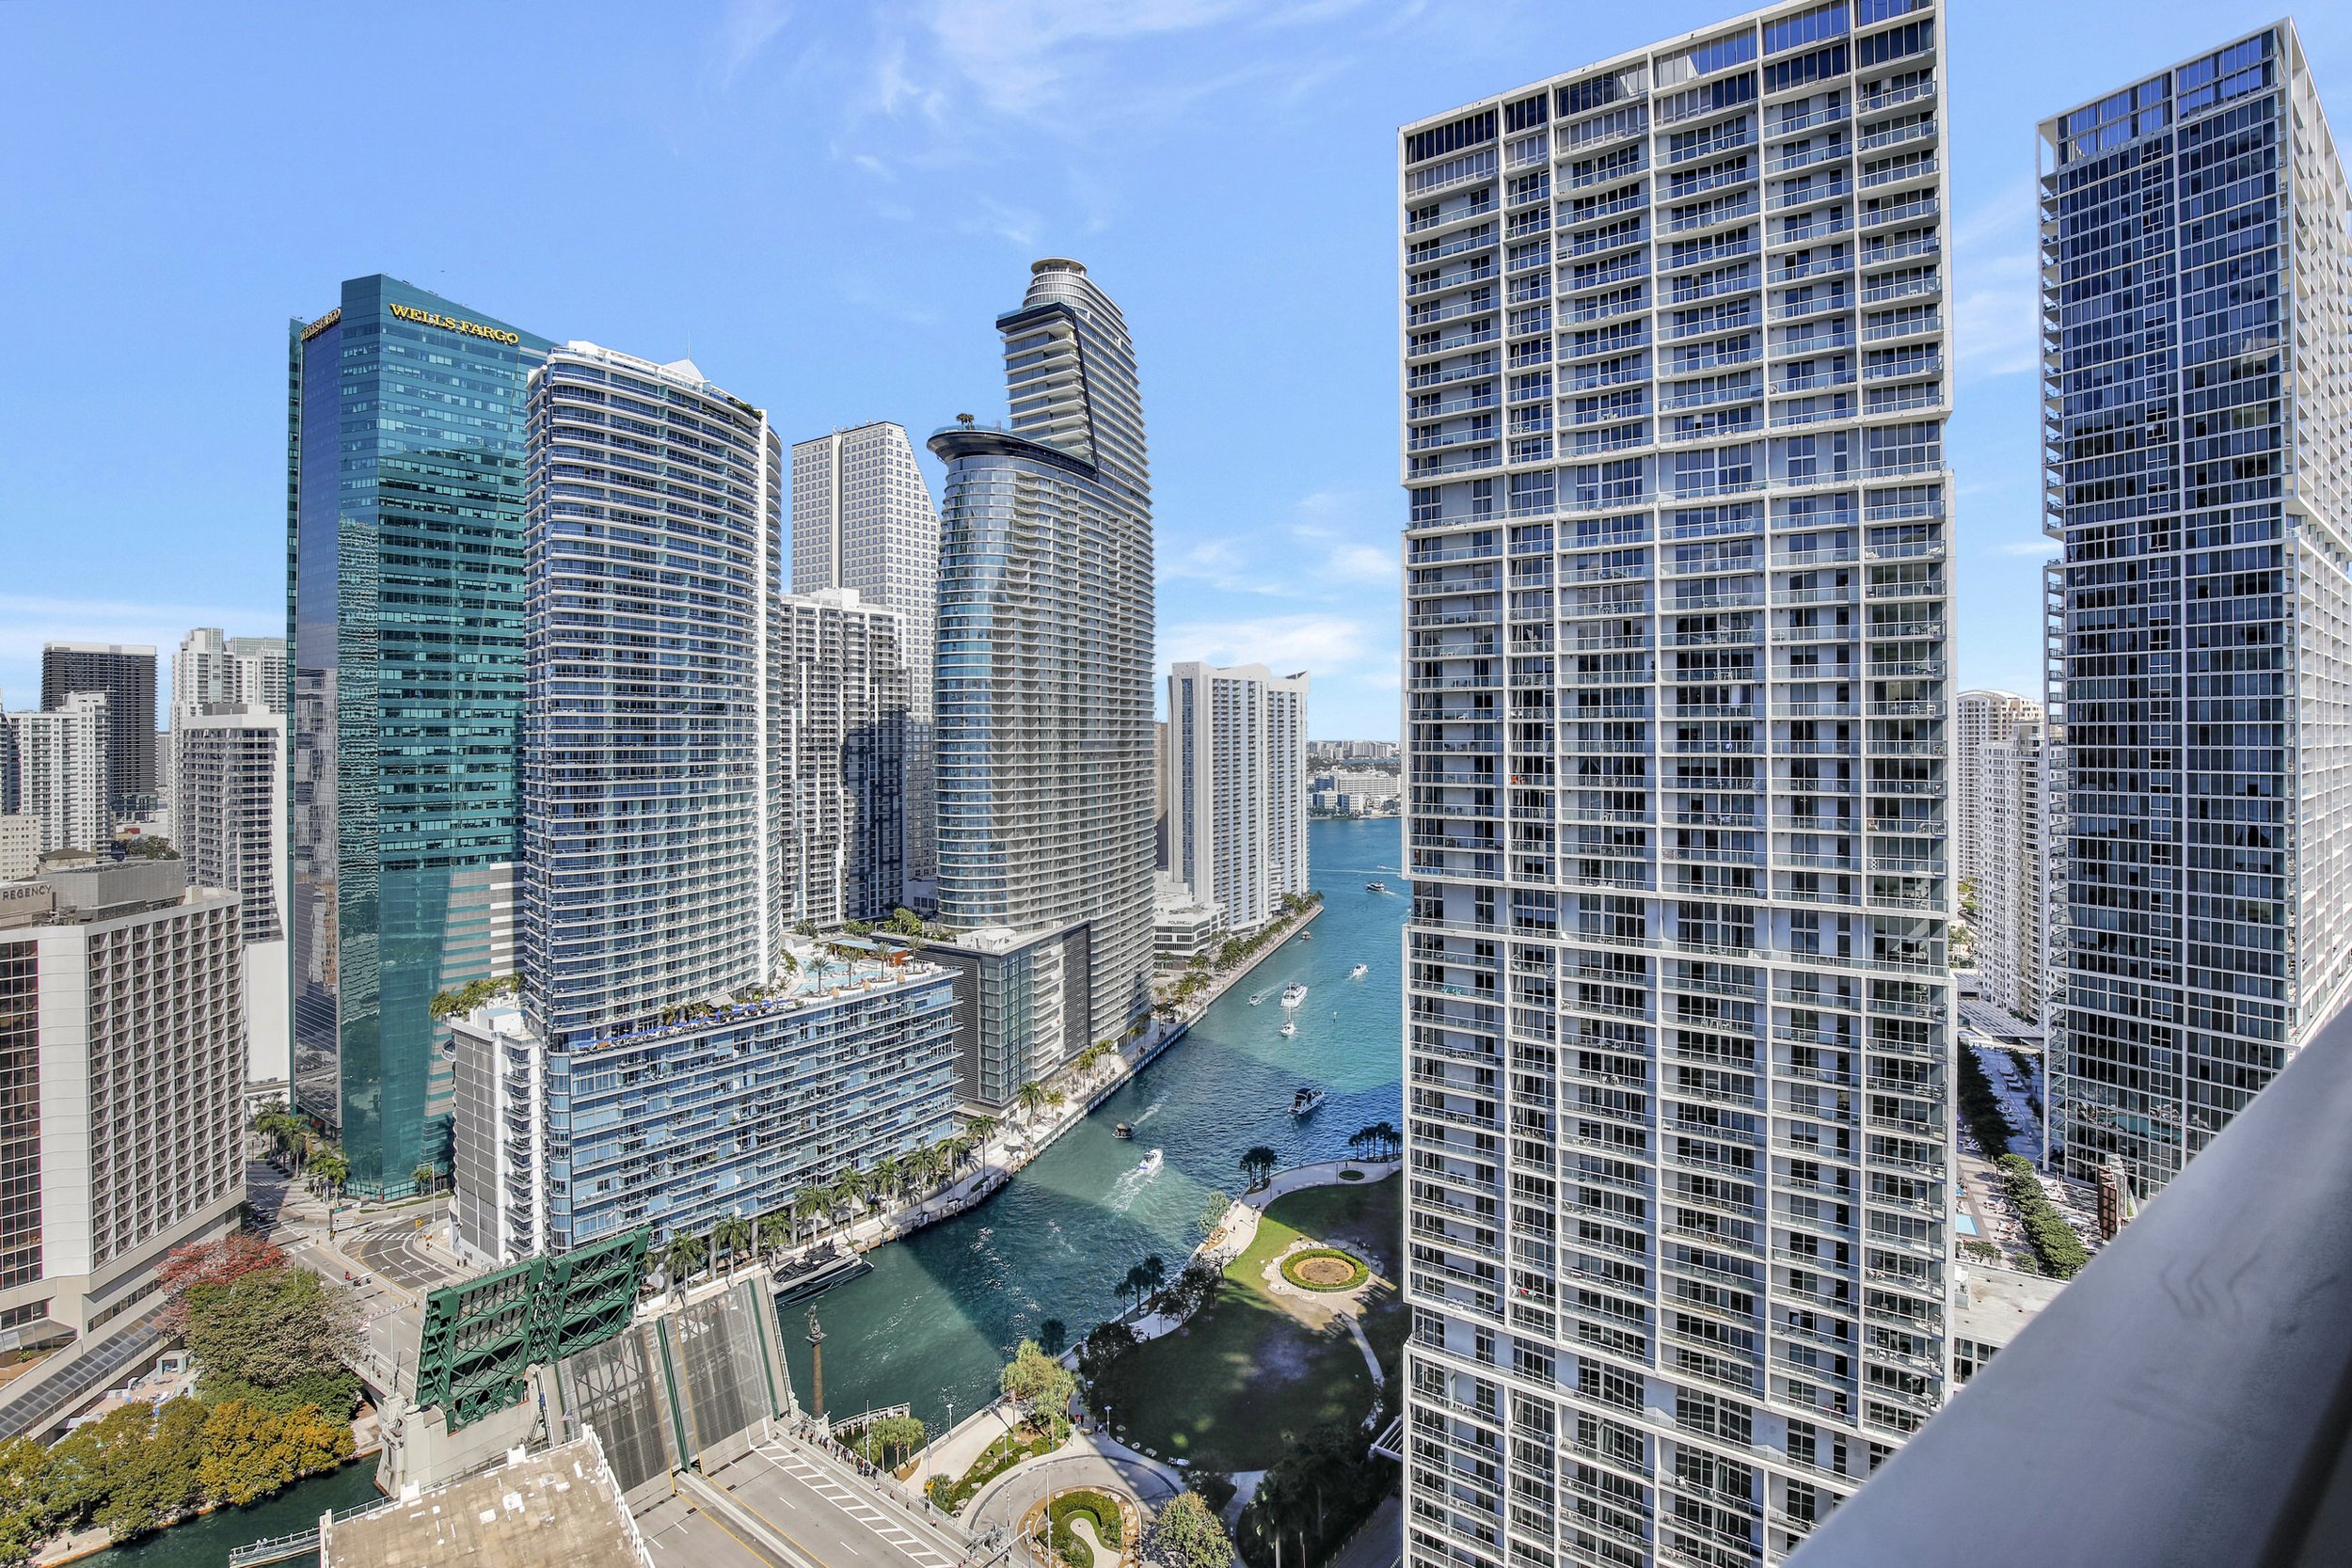 Check Out This Two-Bedroom Condo For Under $900K In Brickell 7.jpg